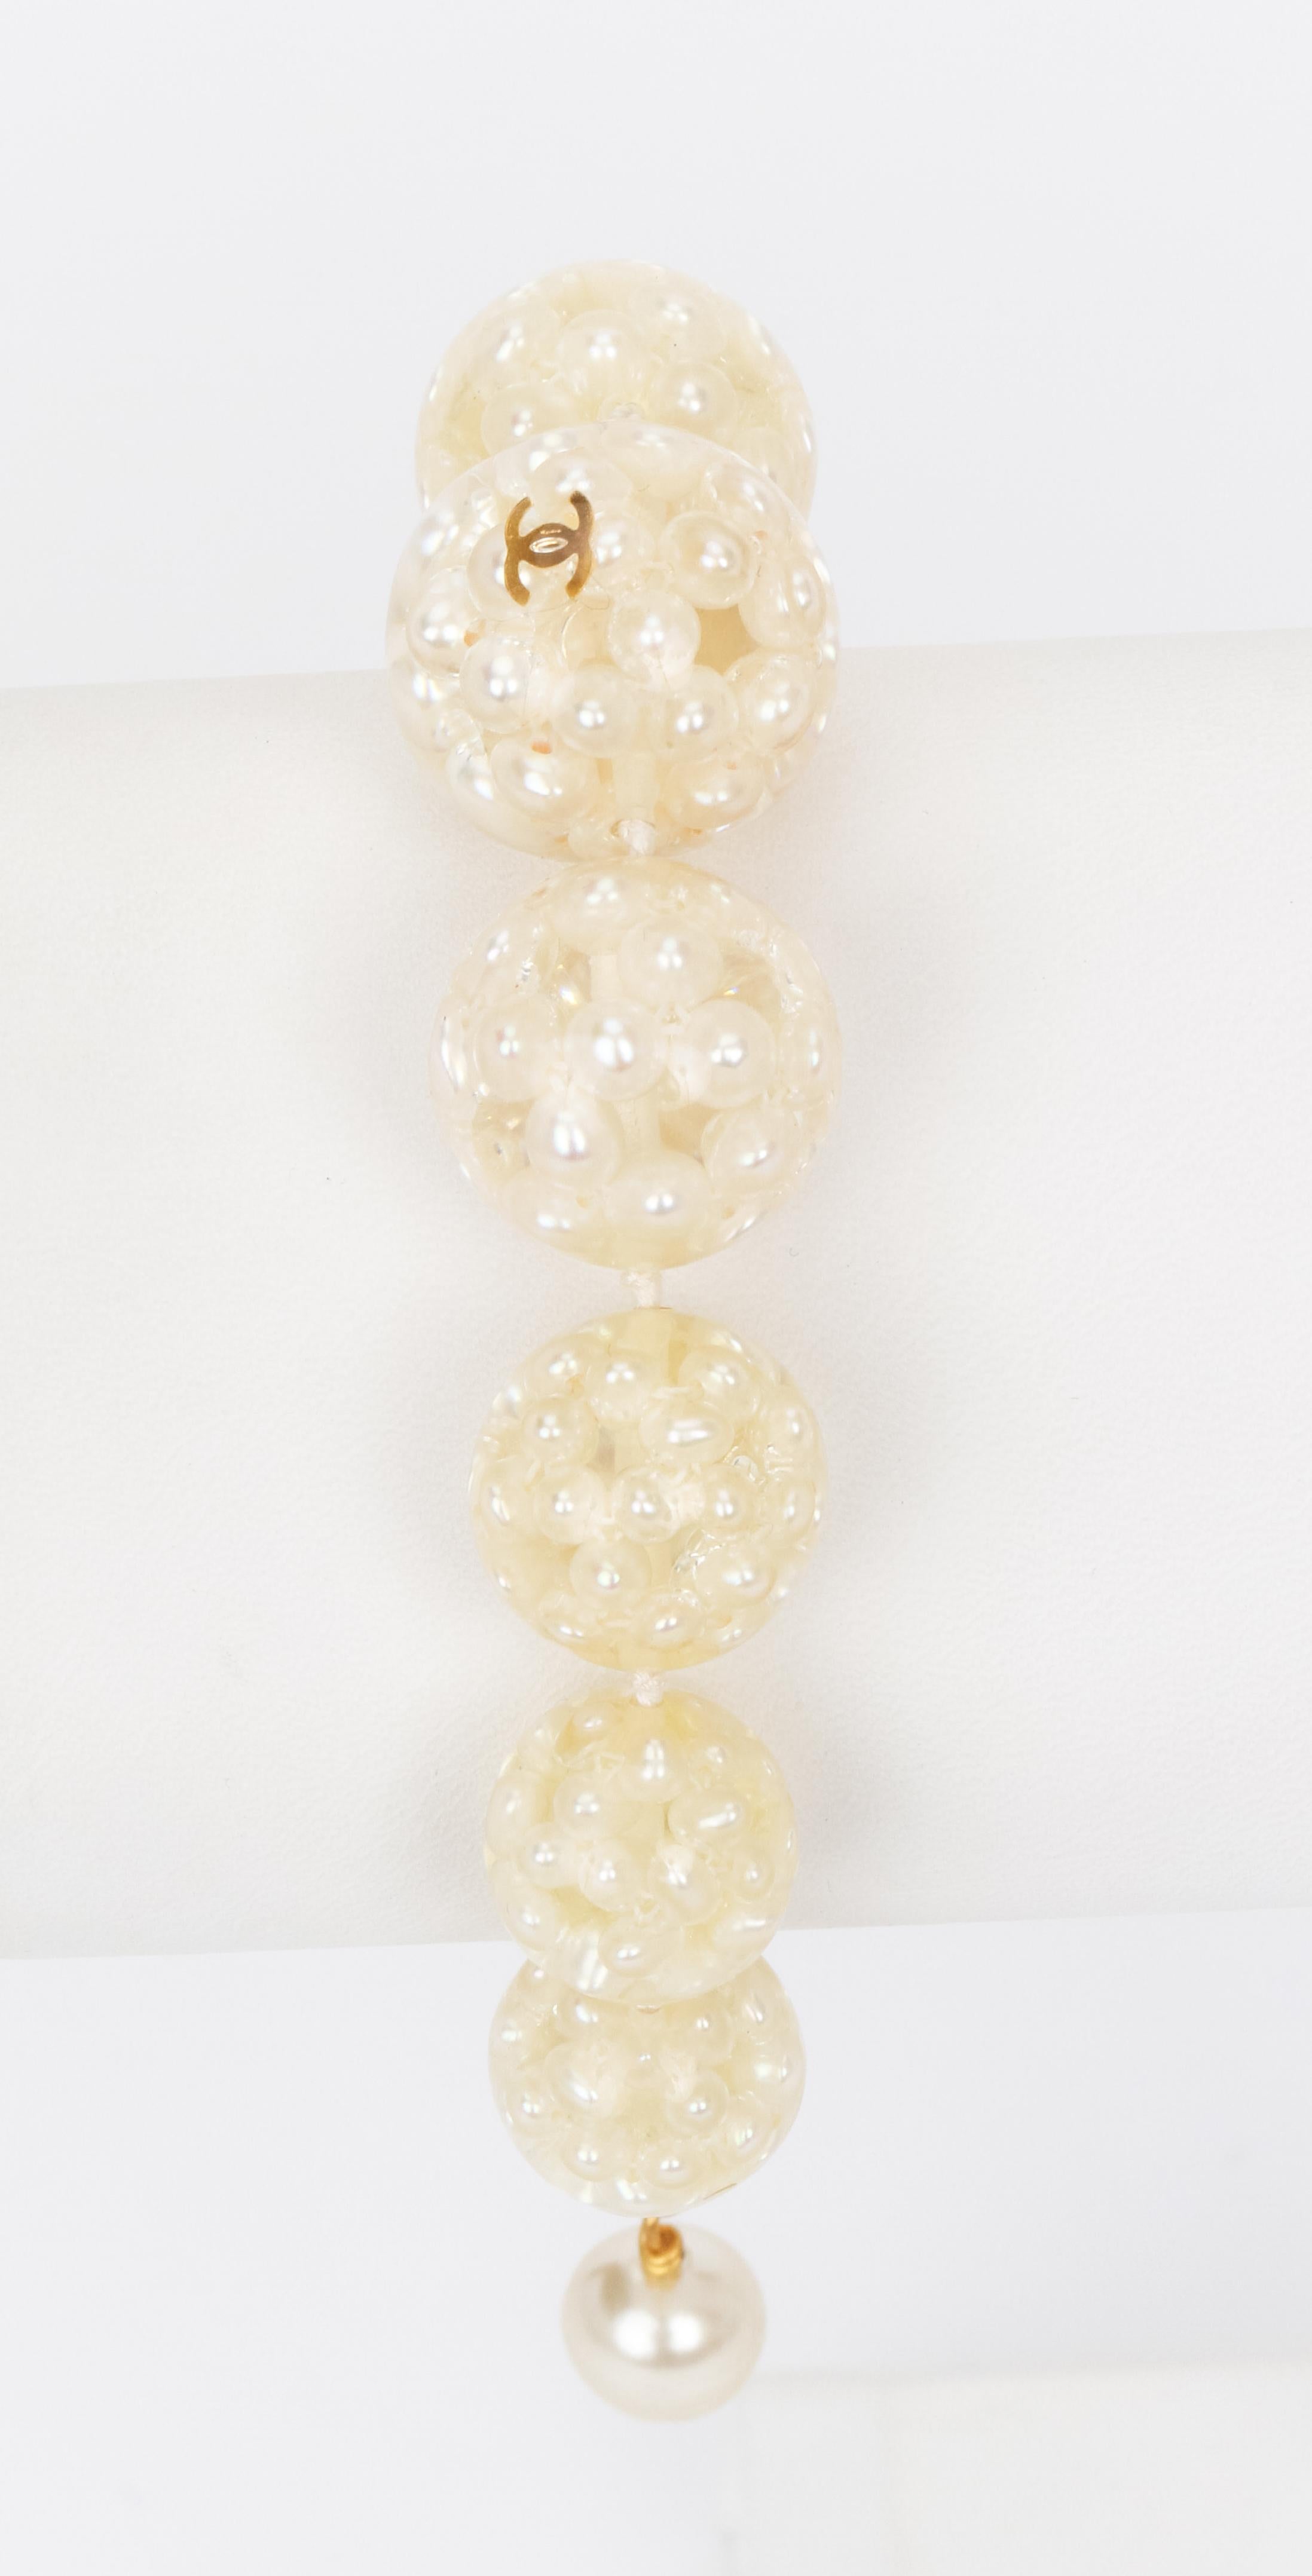 Chanel bracelet with nine spheres, each filled with micro pearls. adjustable length